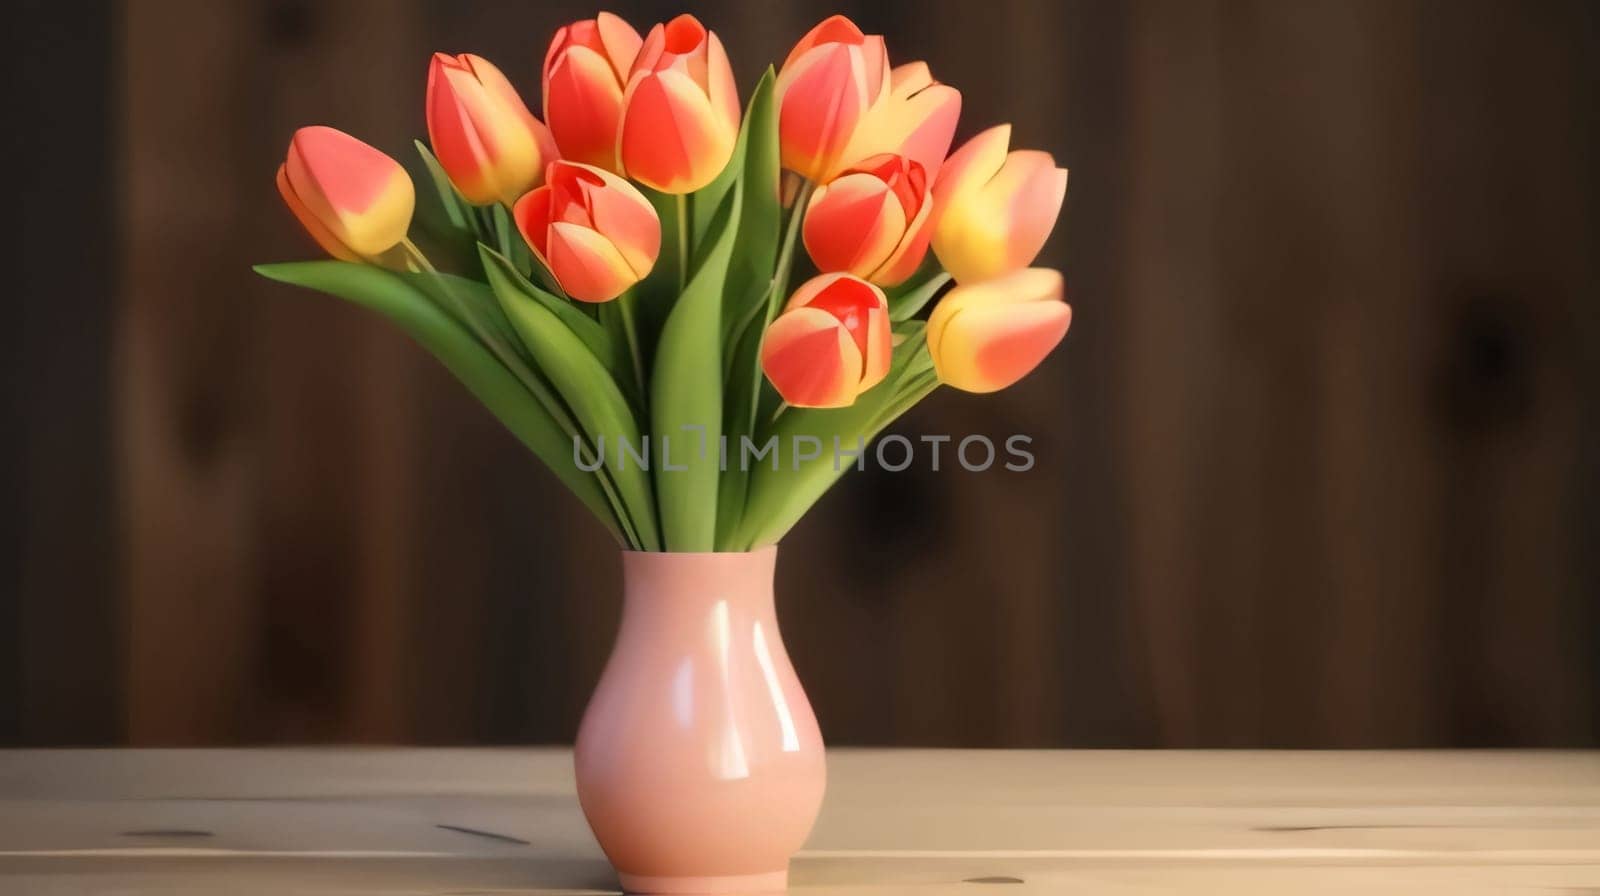 Banner, wooden boards and red tulips in a vase, space for your own content. Flowering flowers, a symbol of spring, new life. A joyful time of nature waking up to life.